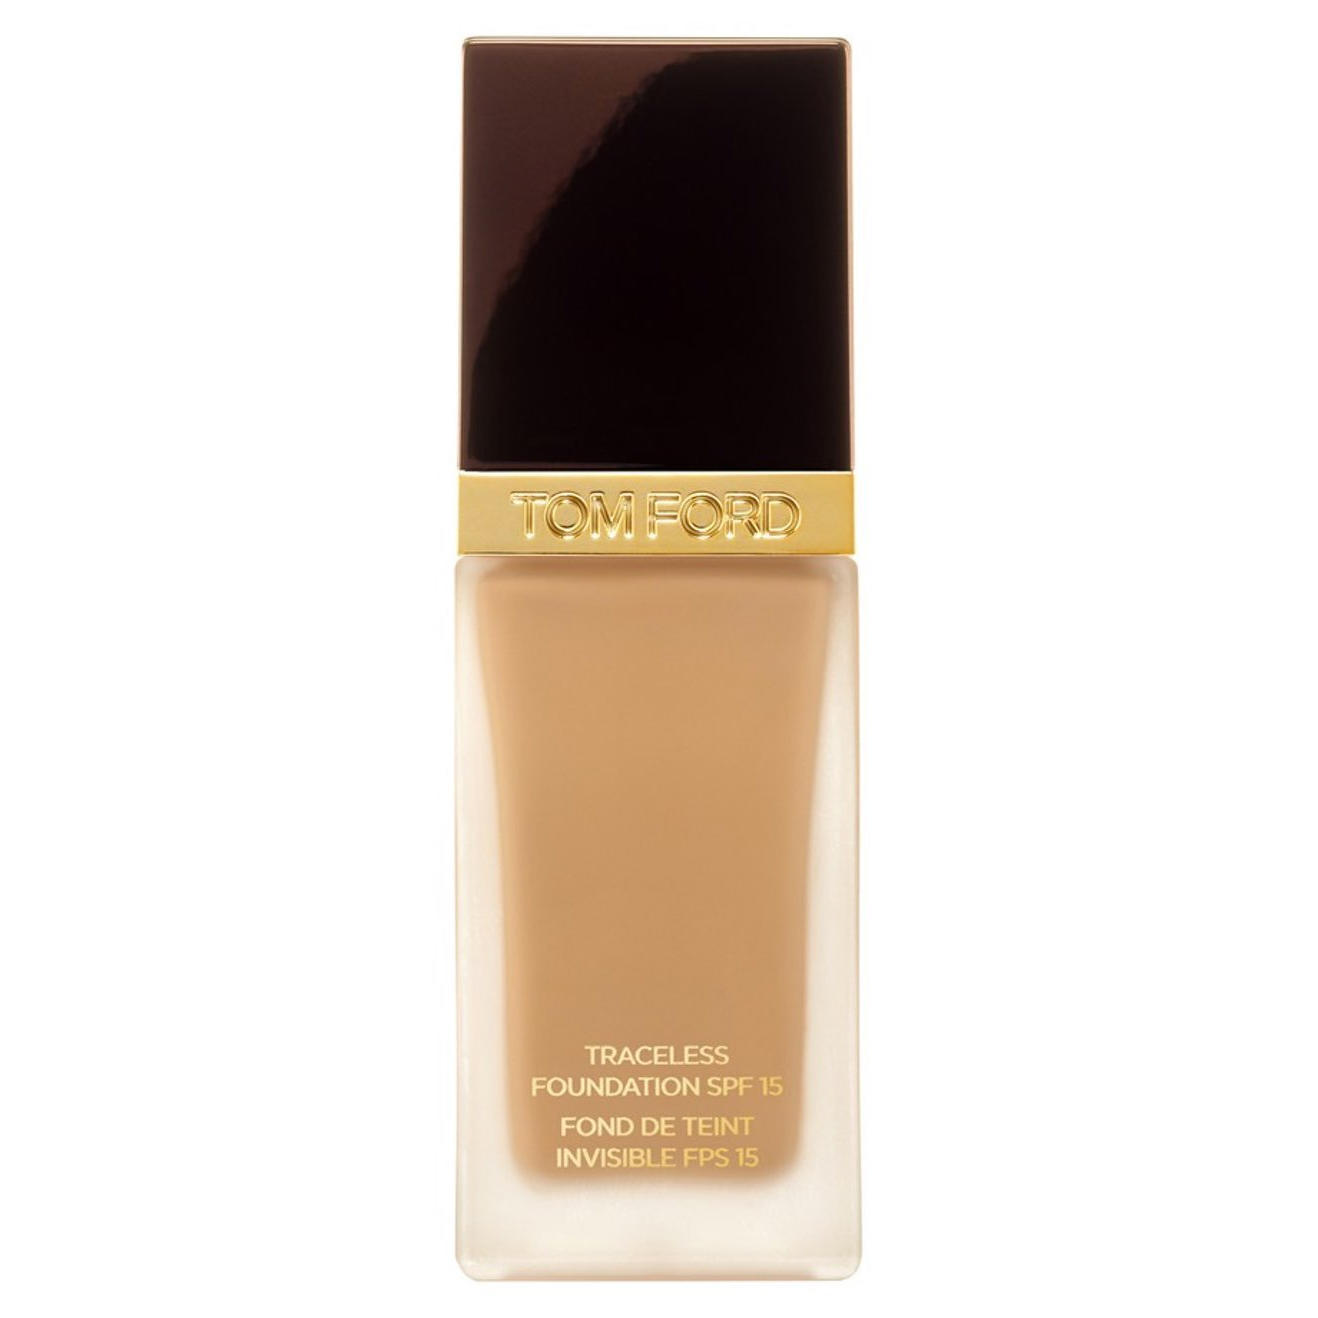 Tom Ford Traceless Foundation SPF 15 Sable 06